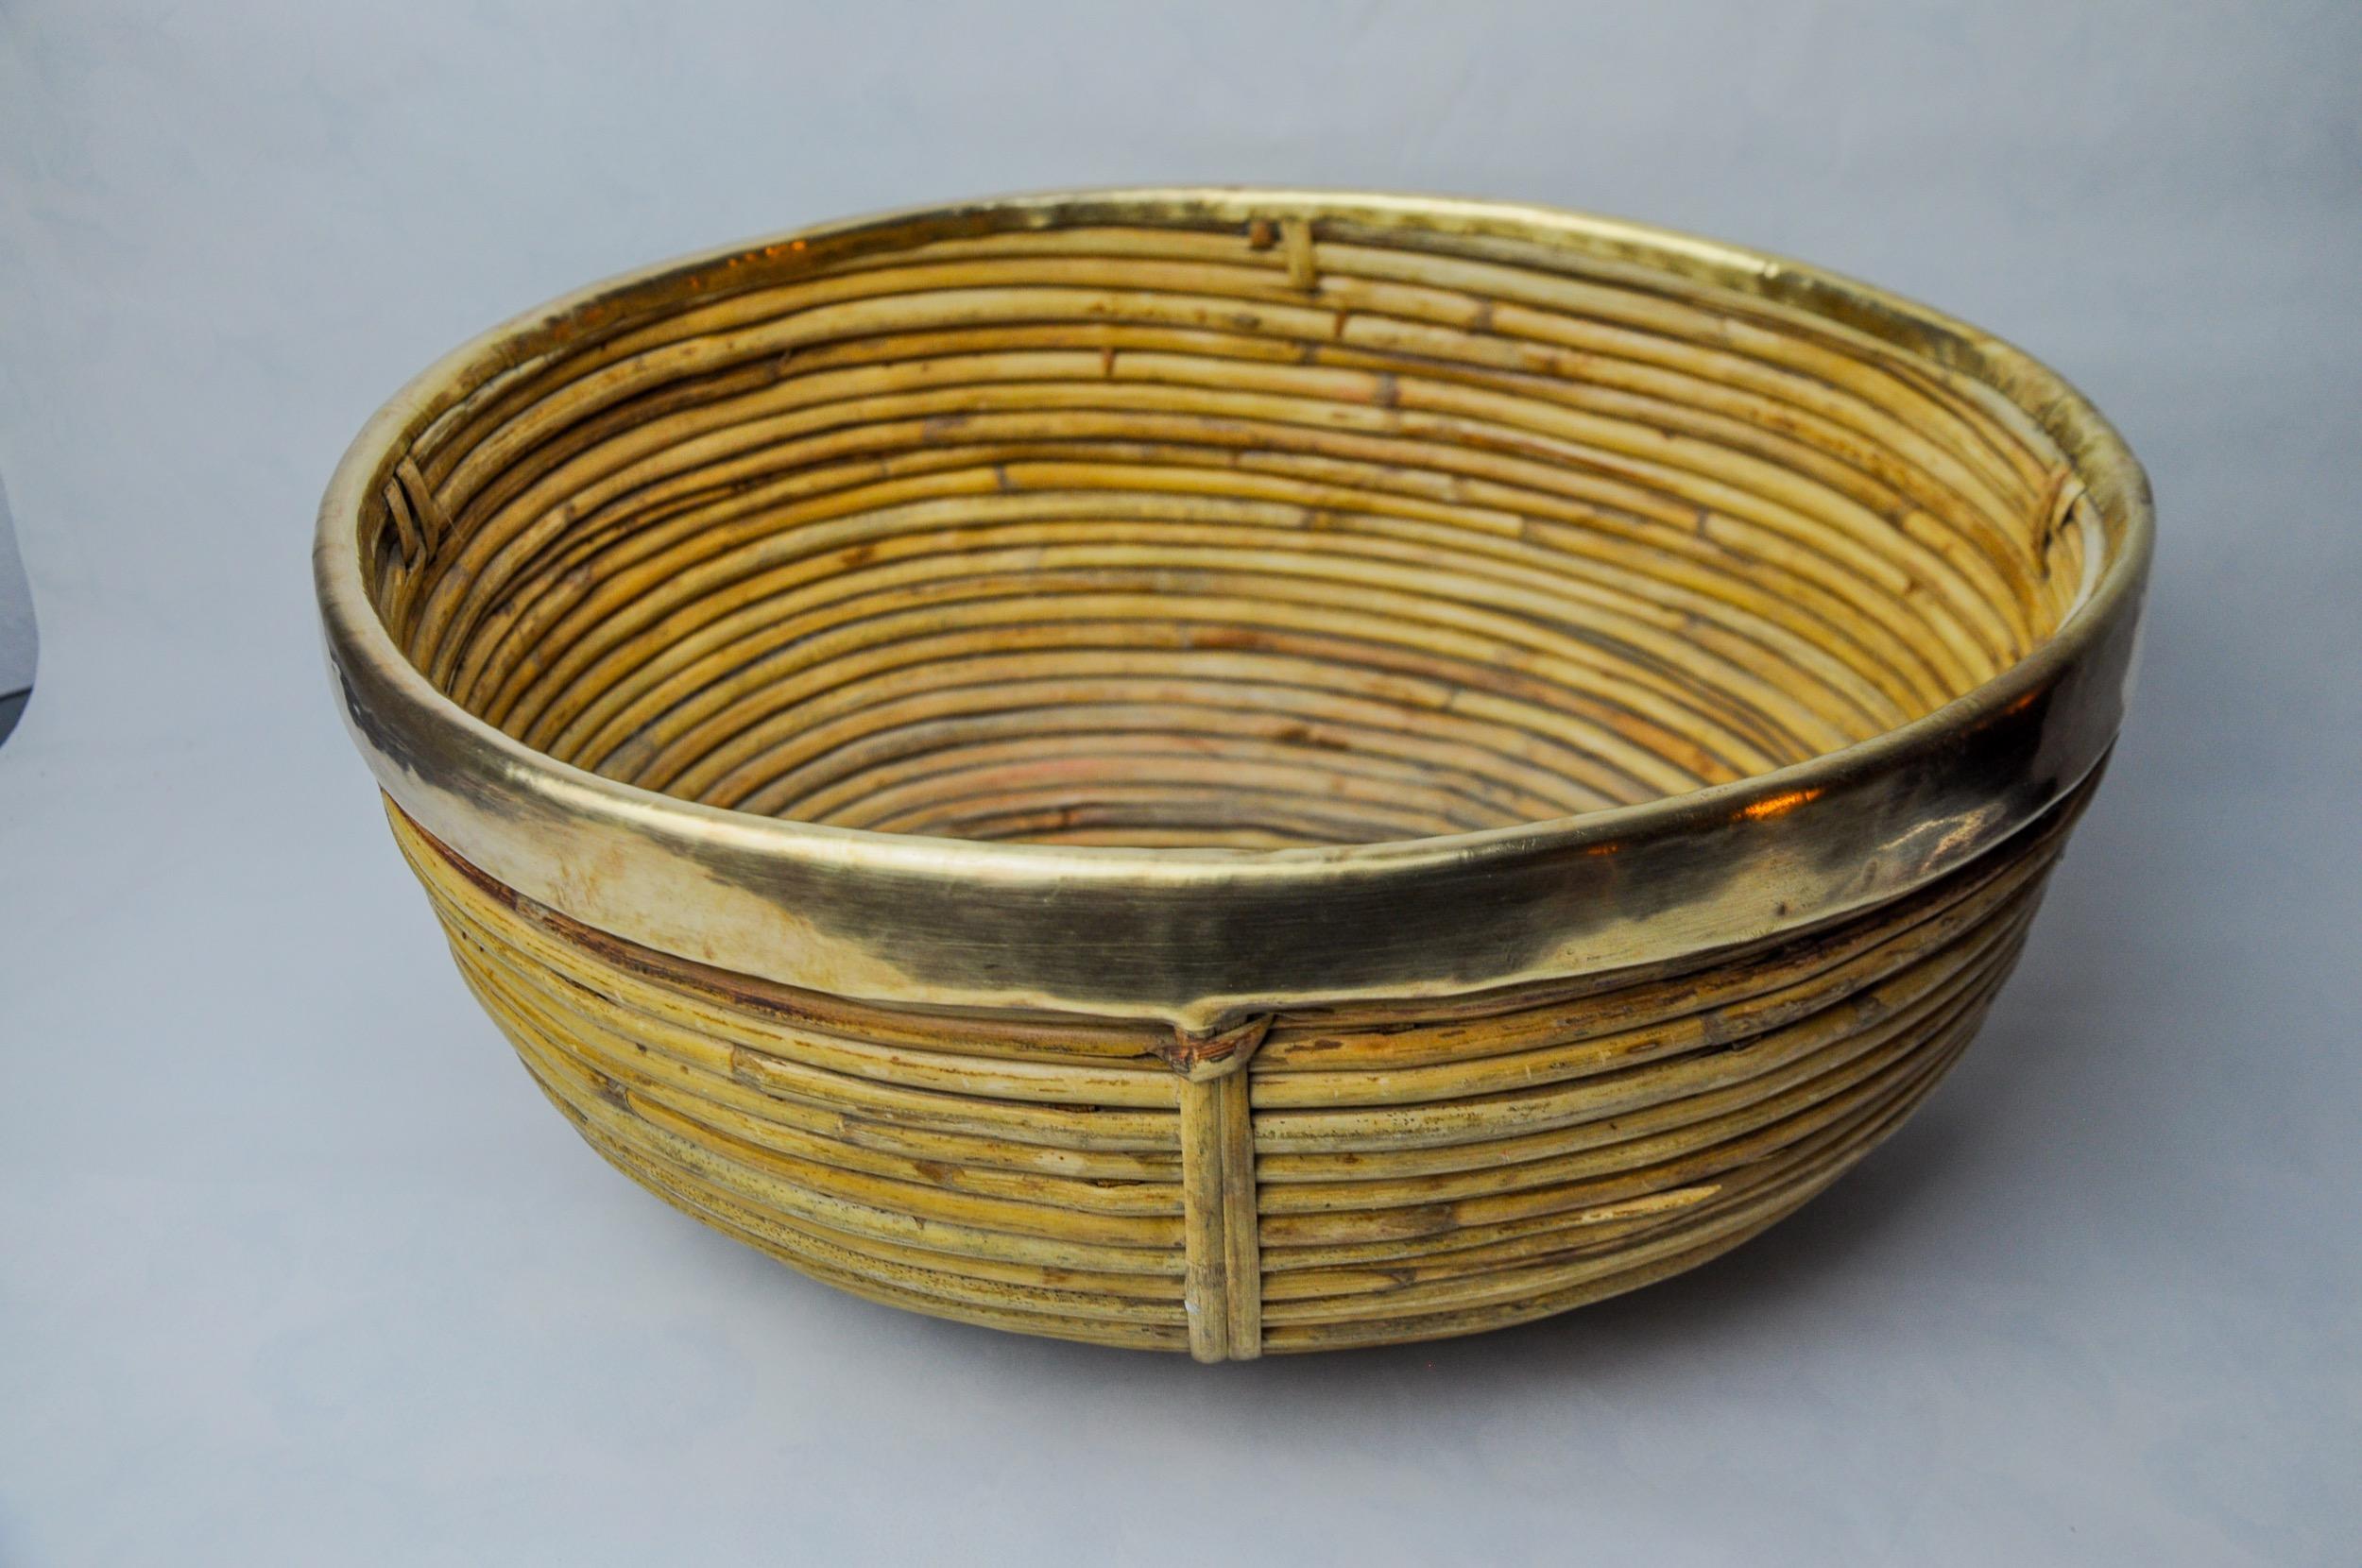 Very nice and large rattan and brass basket made in italy in the 1970s. Round shape, modern style of the middle of the century, it is inspired by the drawings of gabriella crespi. Beautiful decorative object that will bring a real design touch to